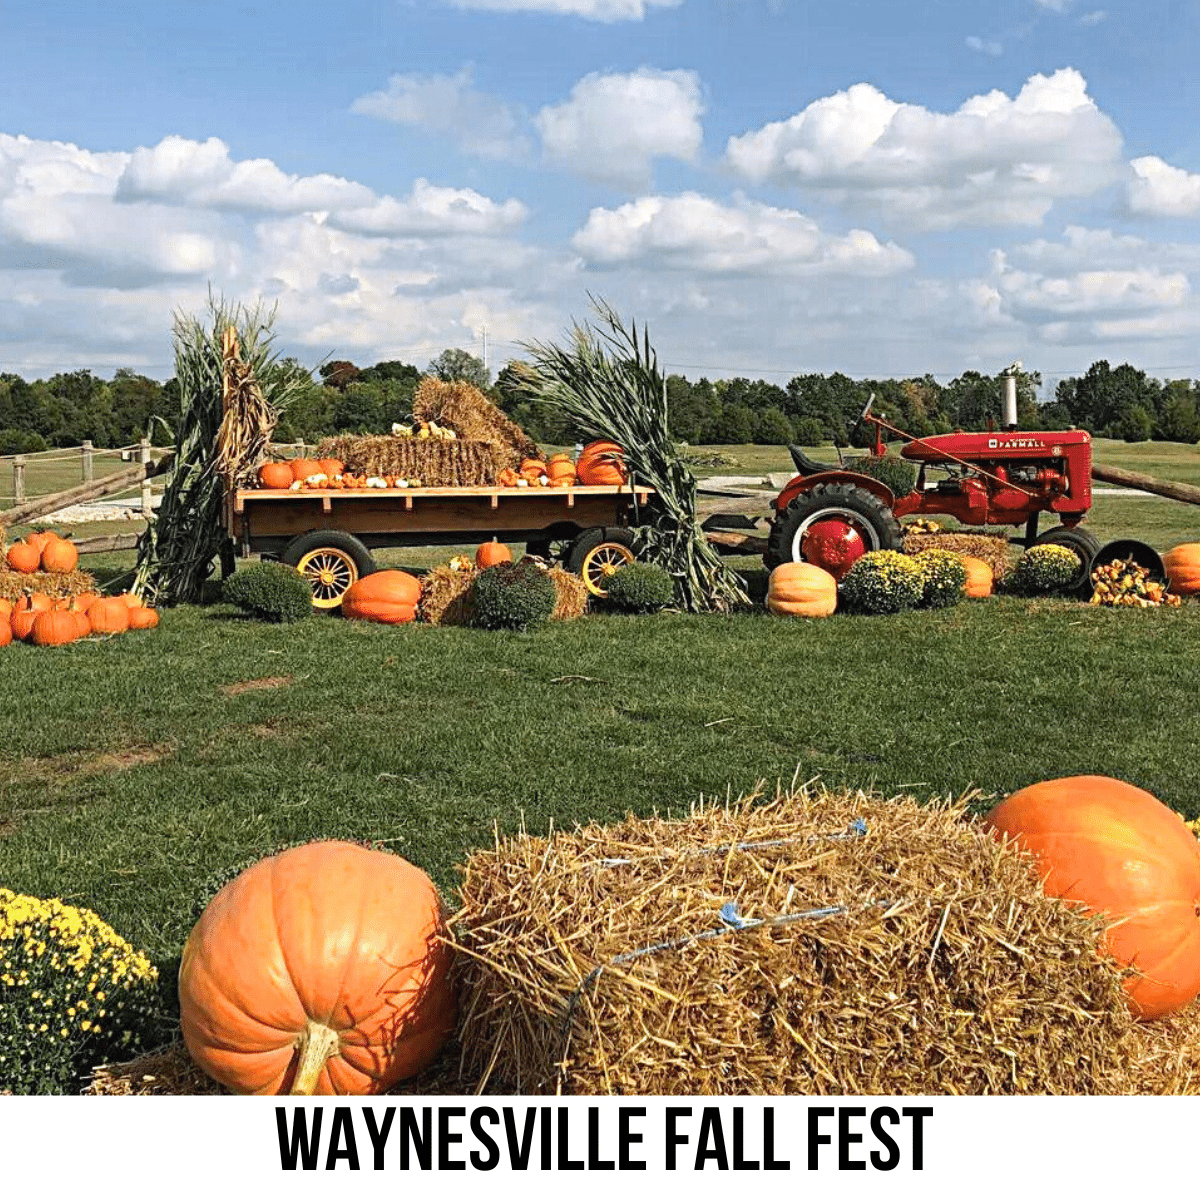 square image with a photo of a tractor and wagon full of pumpkins, with some large orange pumpkins and bales of hay in the foreground. A white strip across the bottom has the text Waynesville Fall Fest. Image courtesy of Waynesville Fall Fest